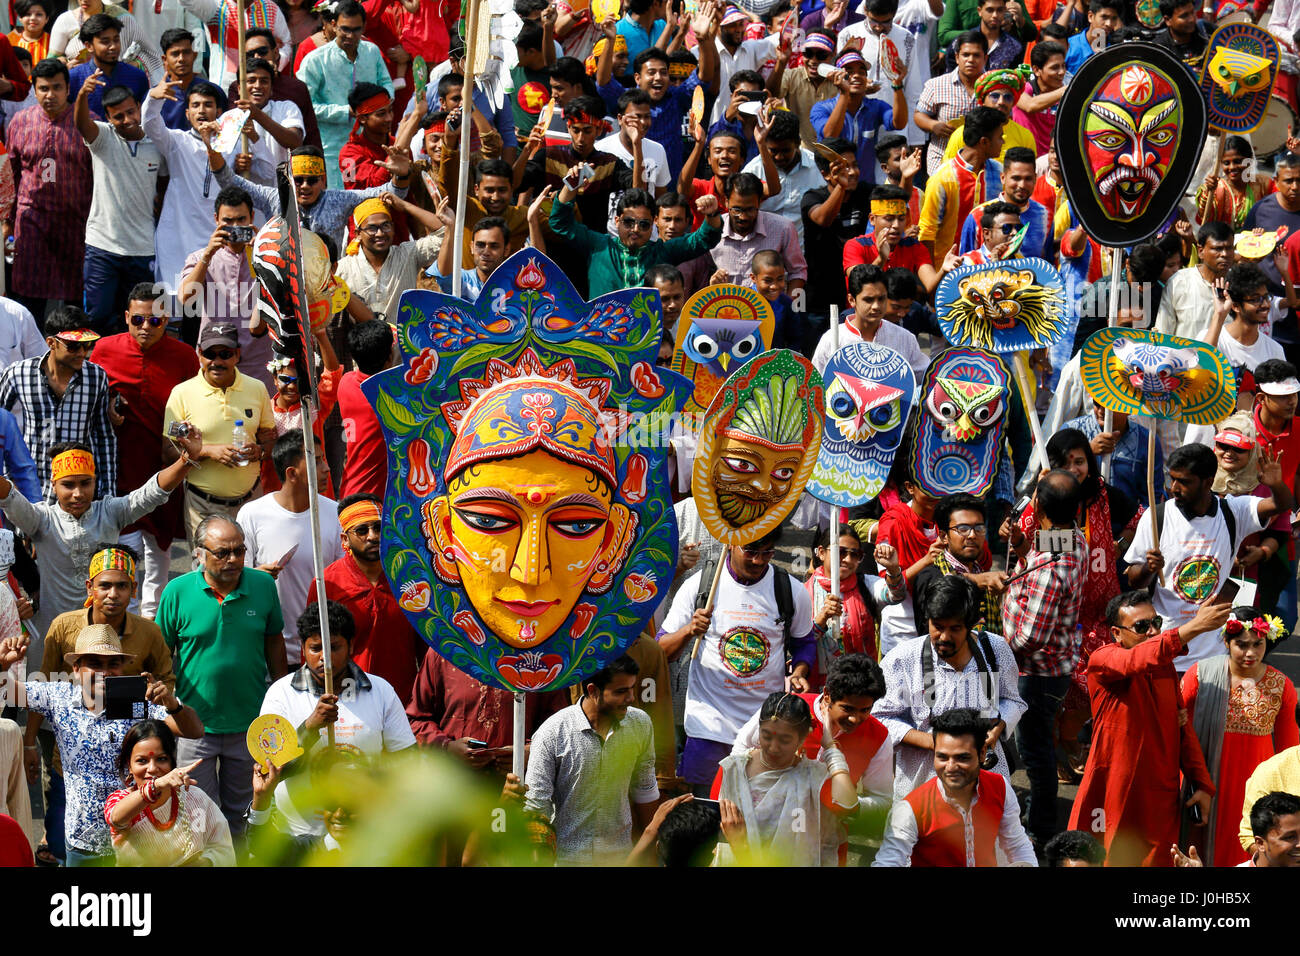 Dhaka, Bangladesh. 14th Apr, 2017. Mangal Shobhajatra, a colourful and festive procession celebrating Pahela Baishakh, the Bangala New Year, sets off from the Fine Arts Faculty of Dhaka University to march through the capital. It has been inscribed on Unesco's Representative List of Intangible Cultural Heritage of Humanity. Credit: Muhammad Mostafigur Rahman/Alamy Live News Stock Photo